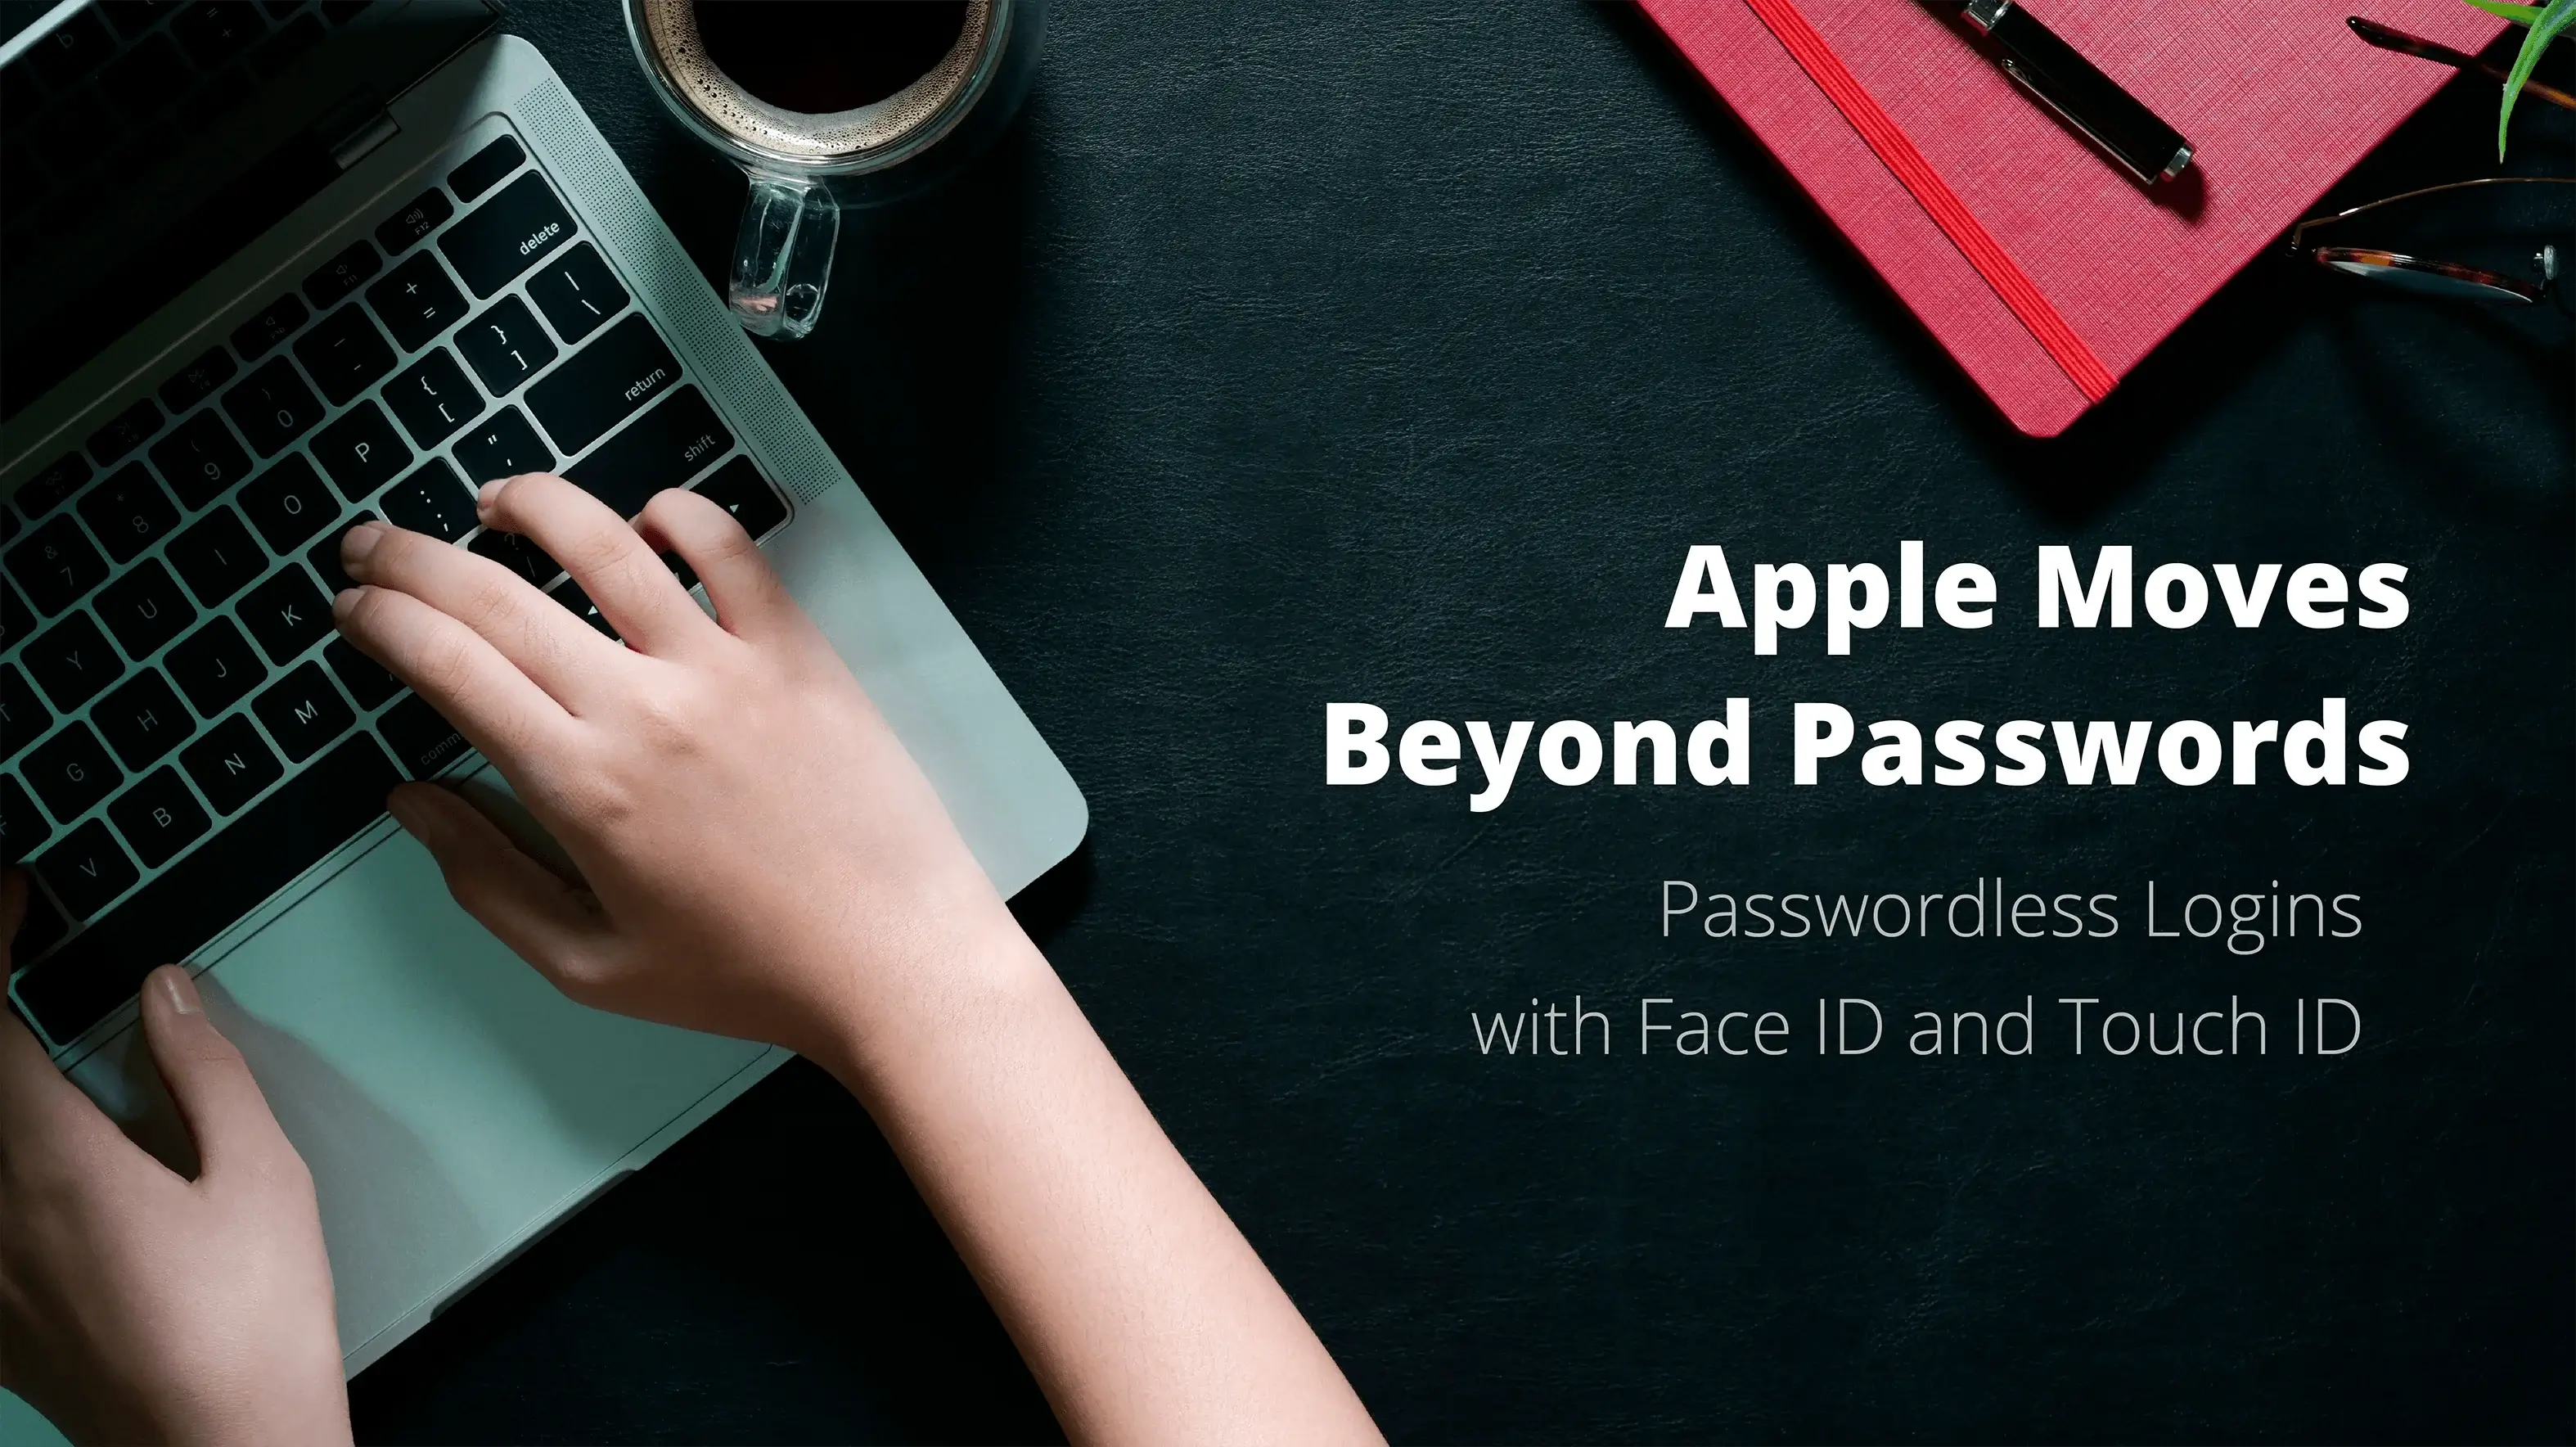 <b>From passwords to passwordless: Apple adopts a new authentication technology </b>